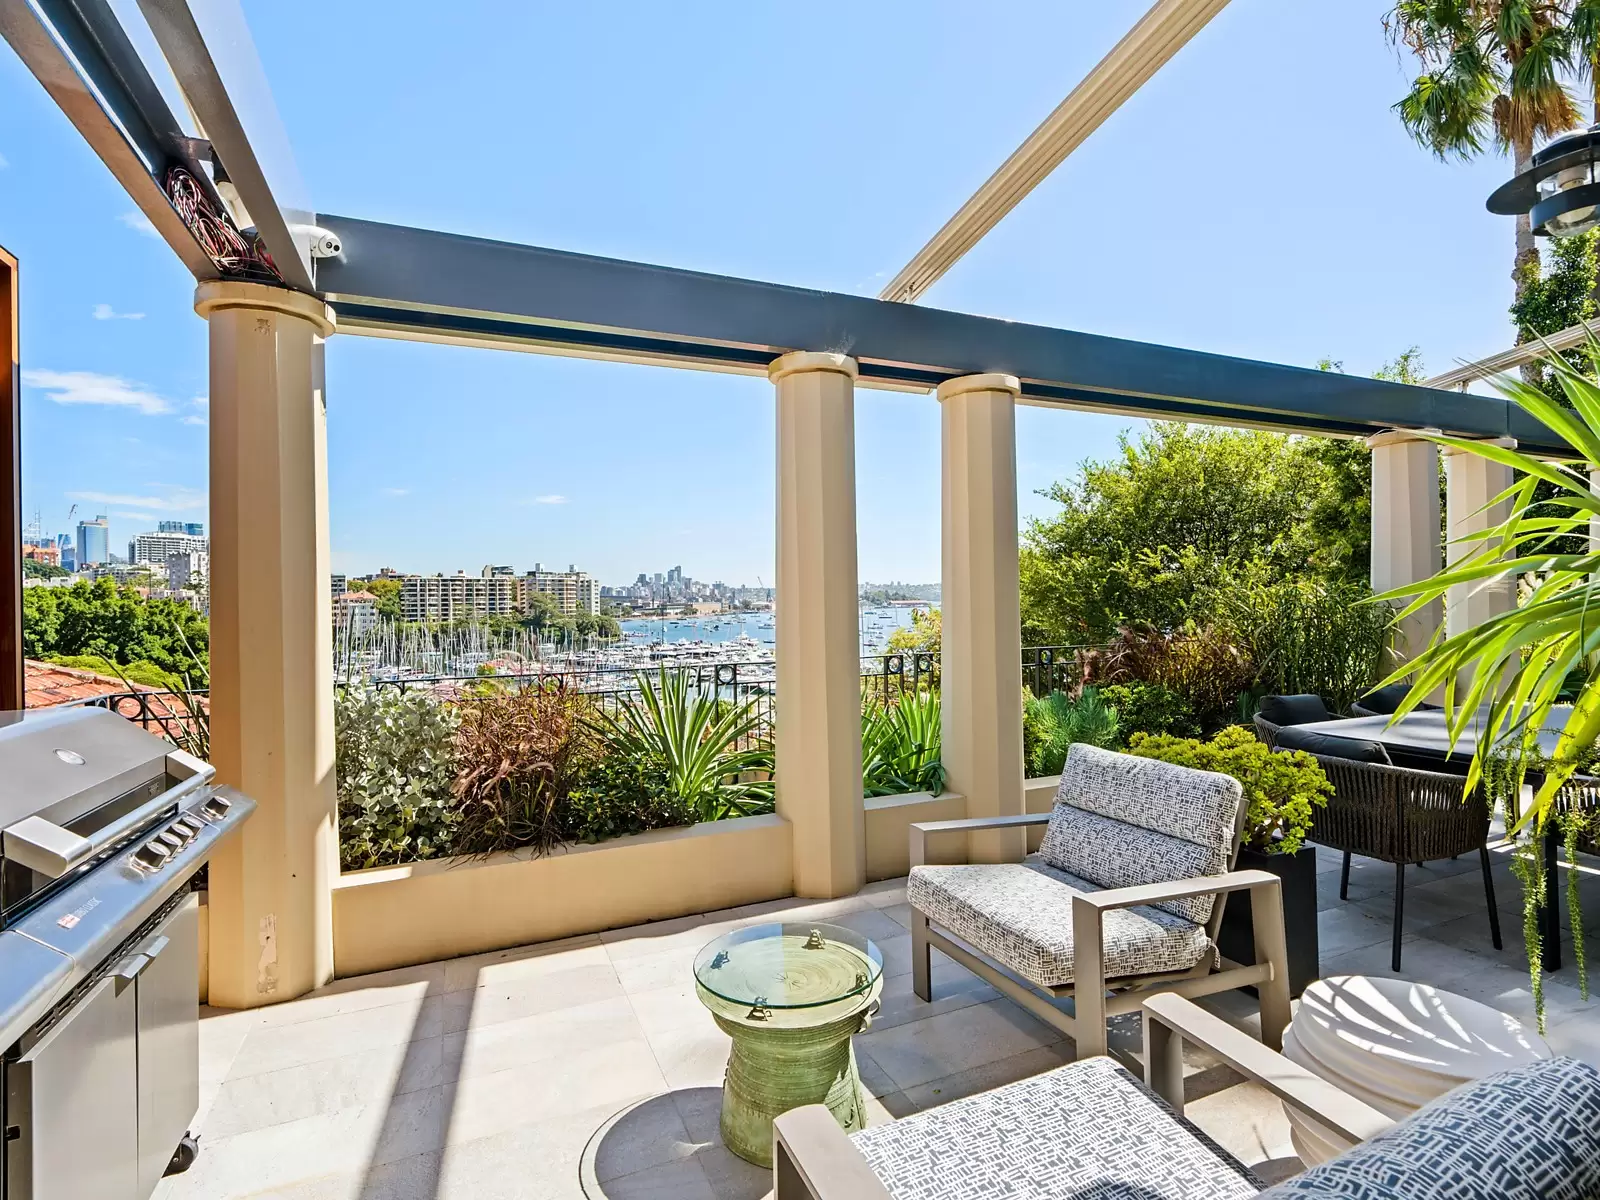 Photo #11: 1/40-42 Mona Road, Darling Point - Sold by Sydney Sotheby's International Realty